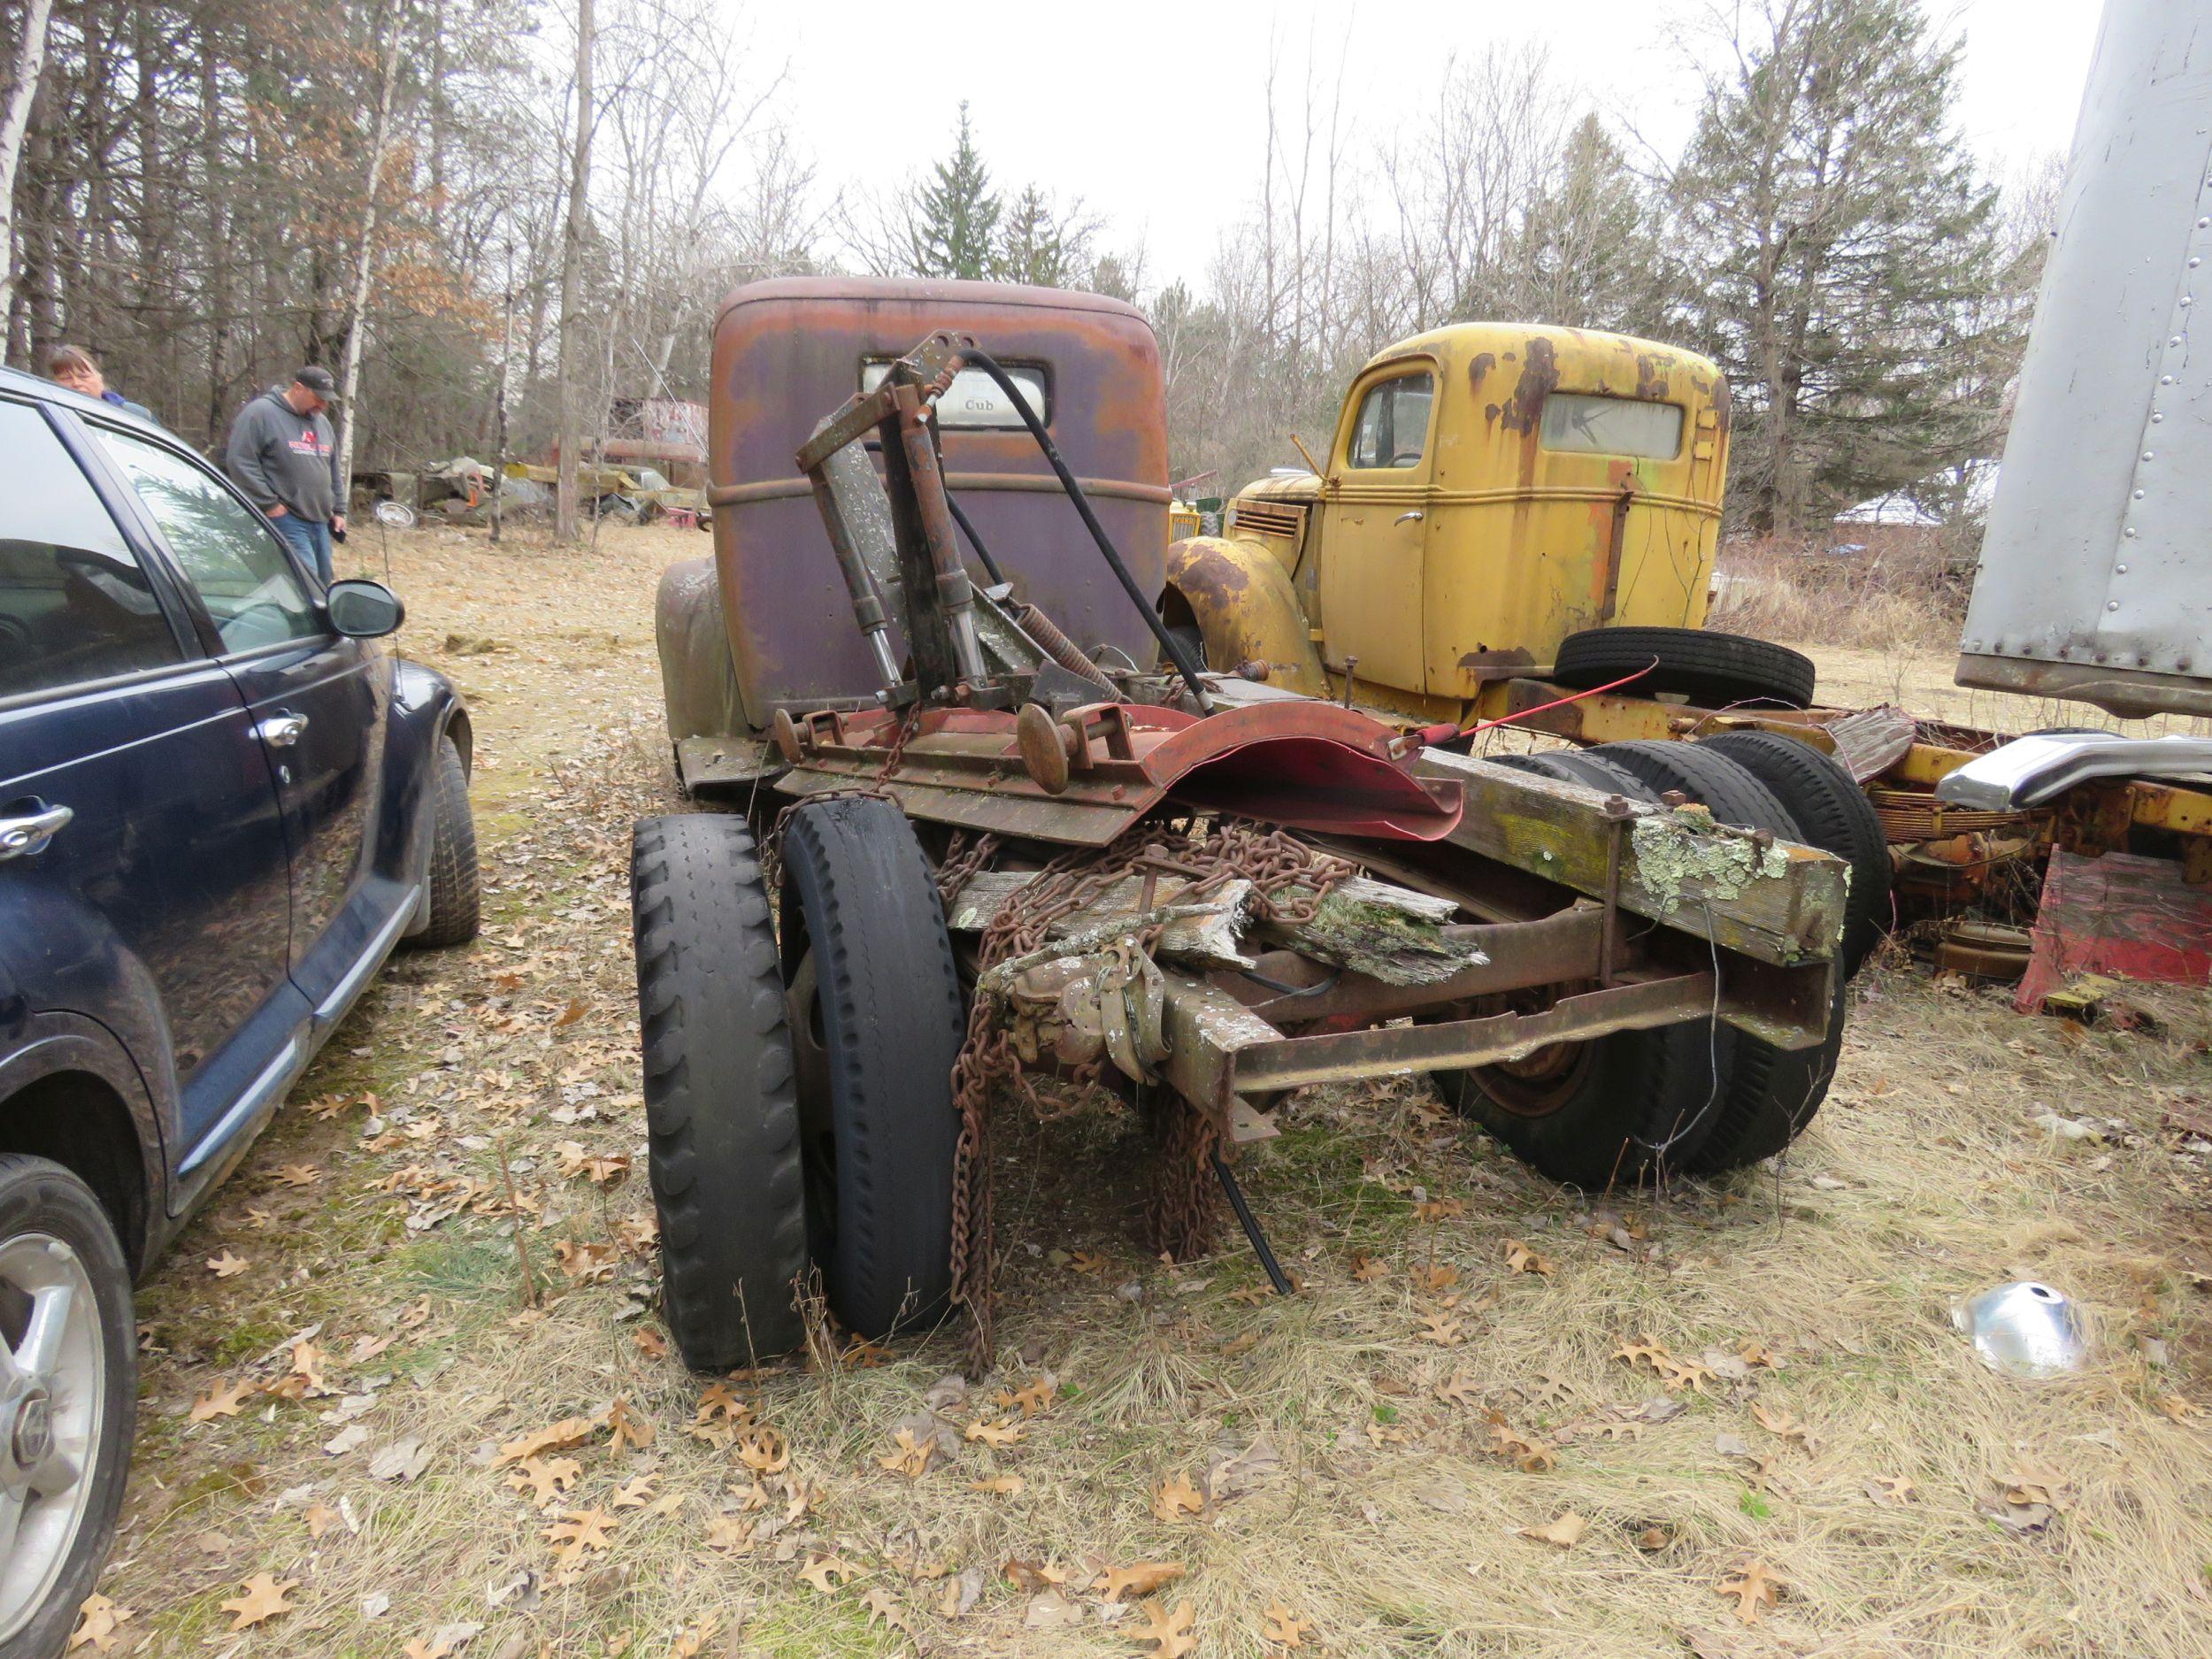 1940's Ford Truck for Rod or Restore